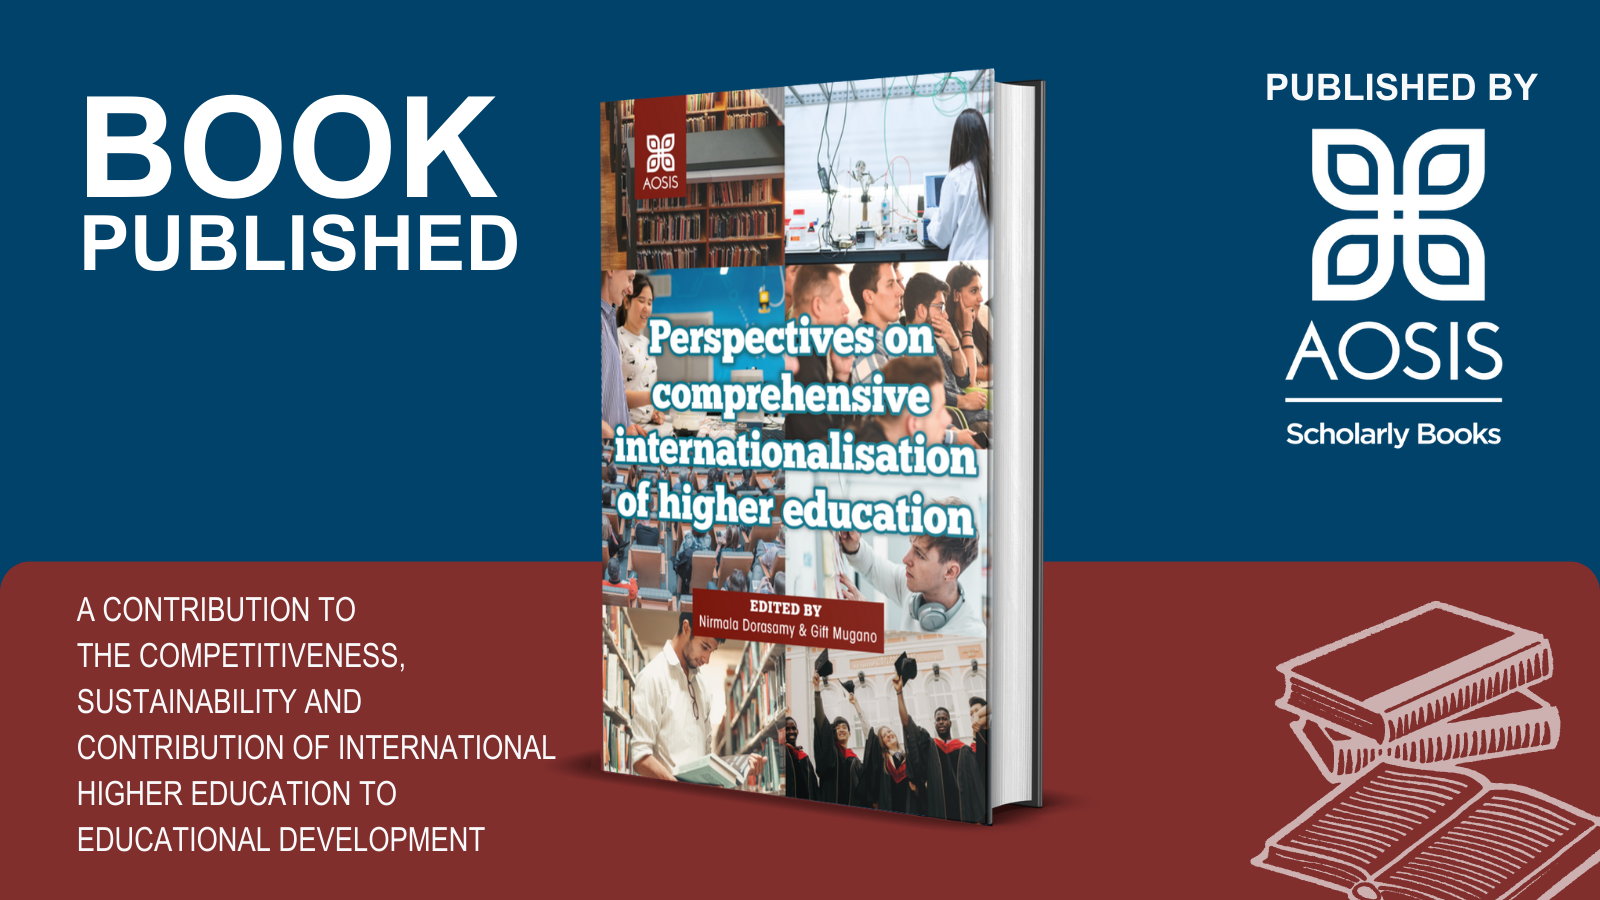 AOSIS Books publishes 'Perspectives on comprehensive internationalisation of higher education'